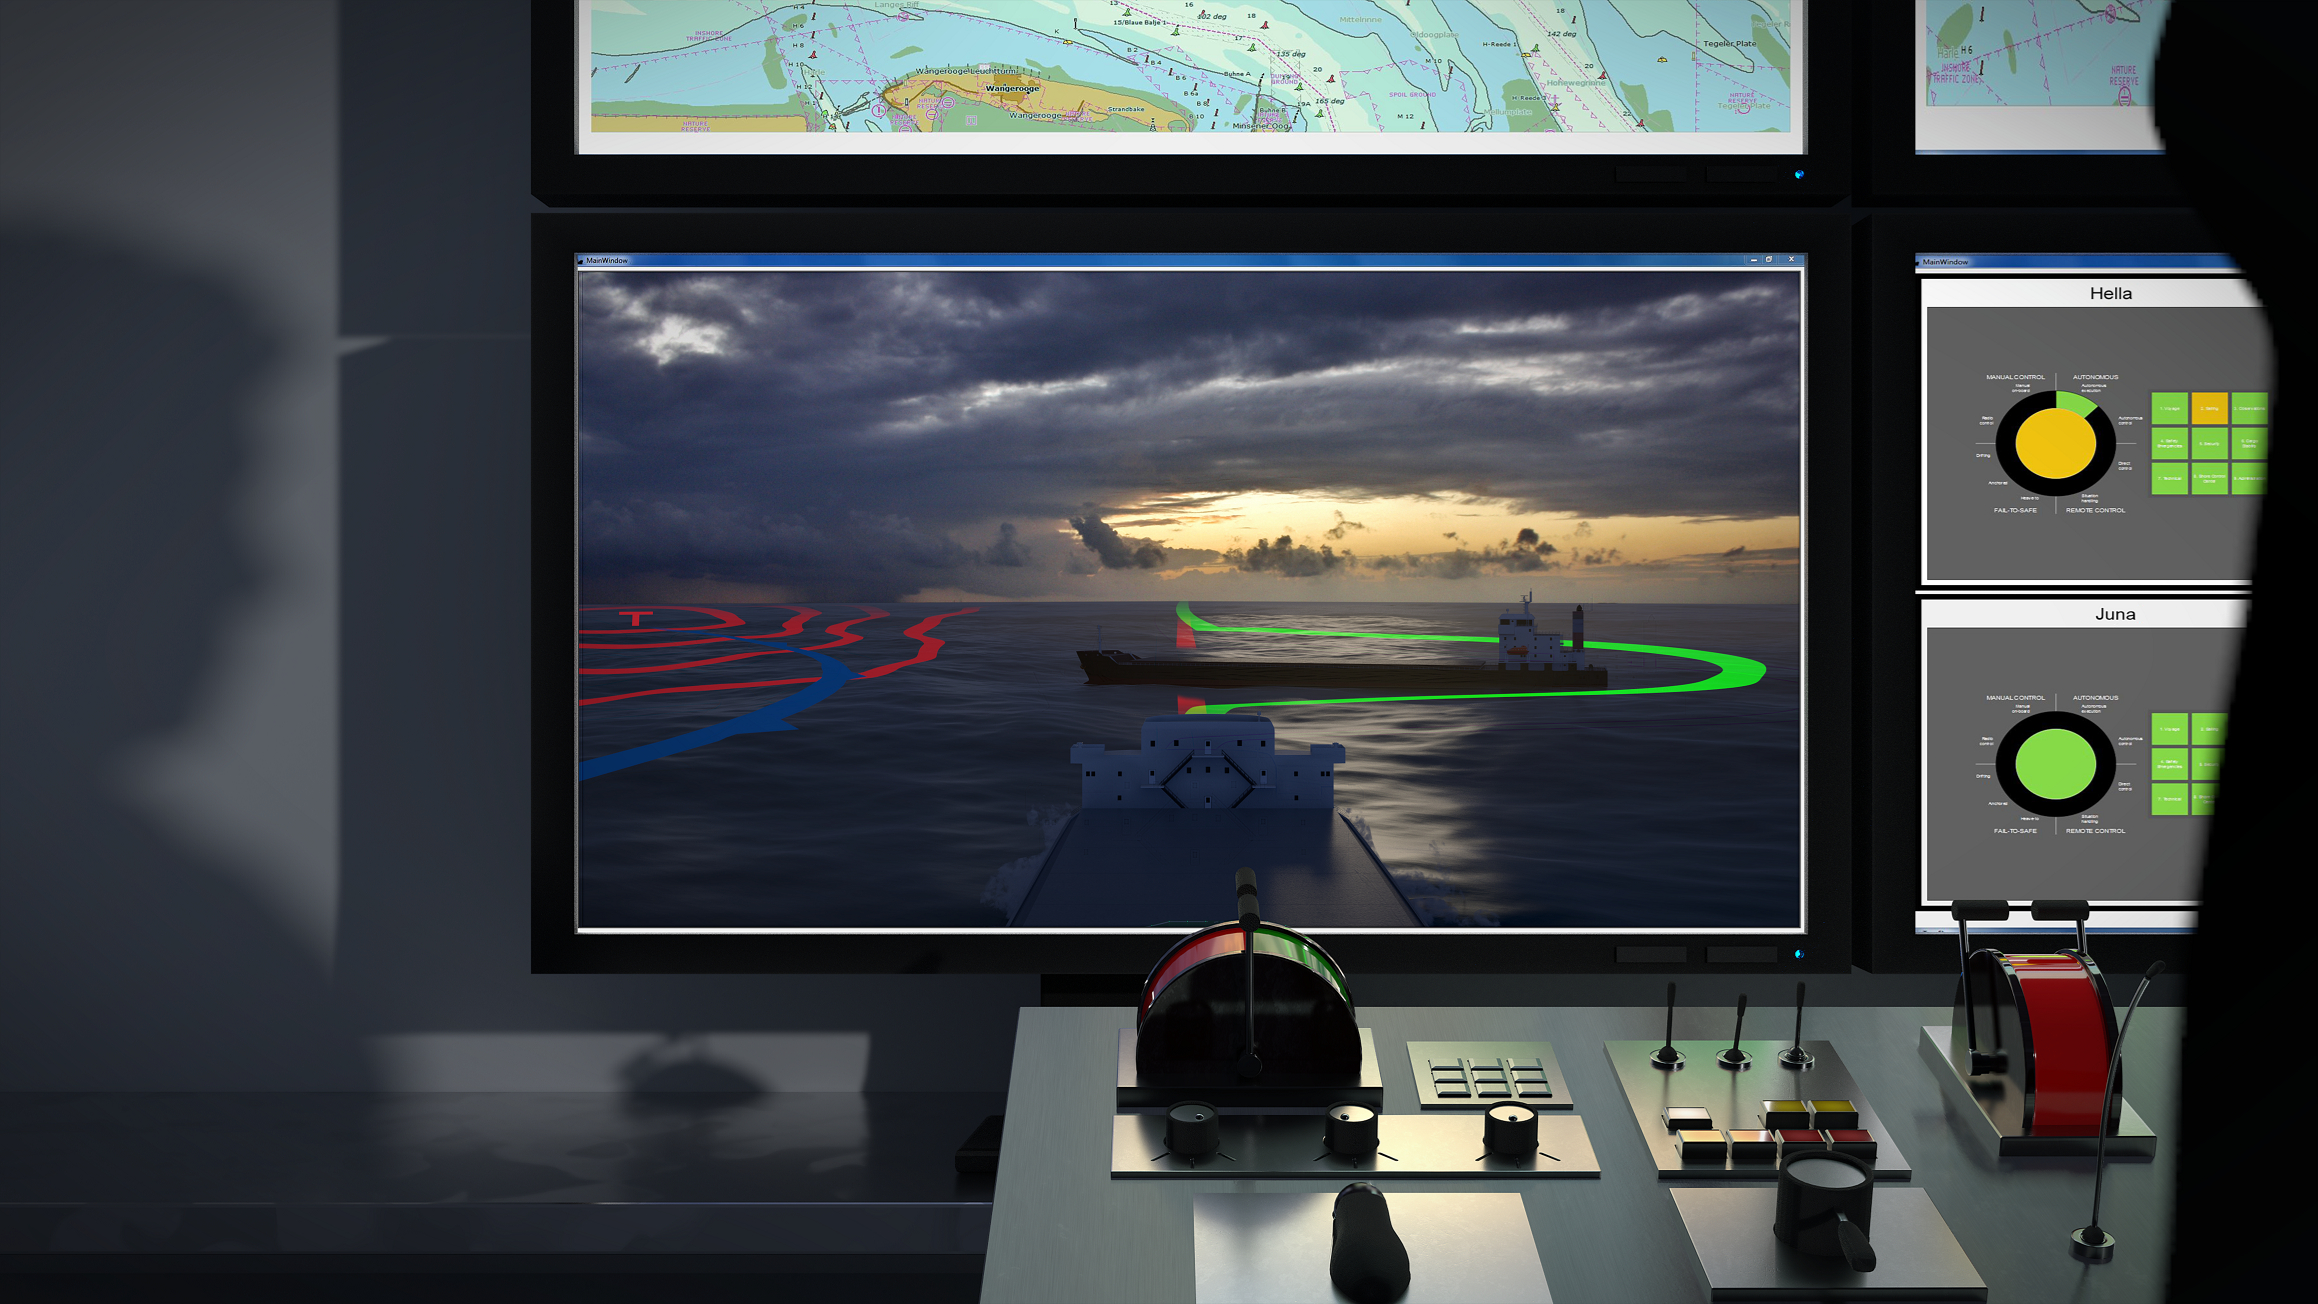 Communication between ships from a controll room